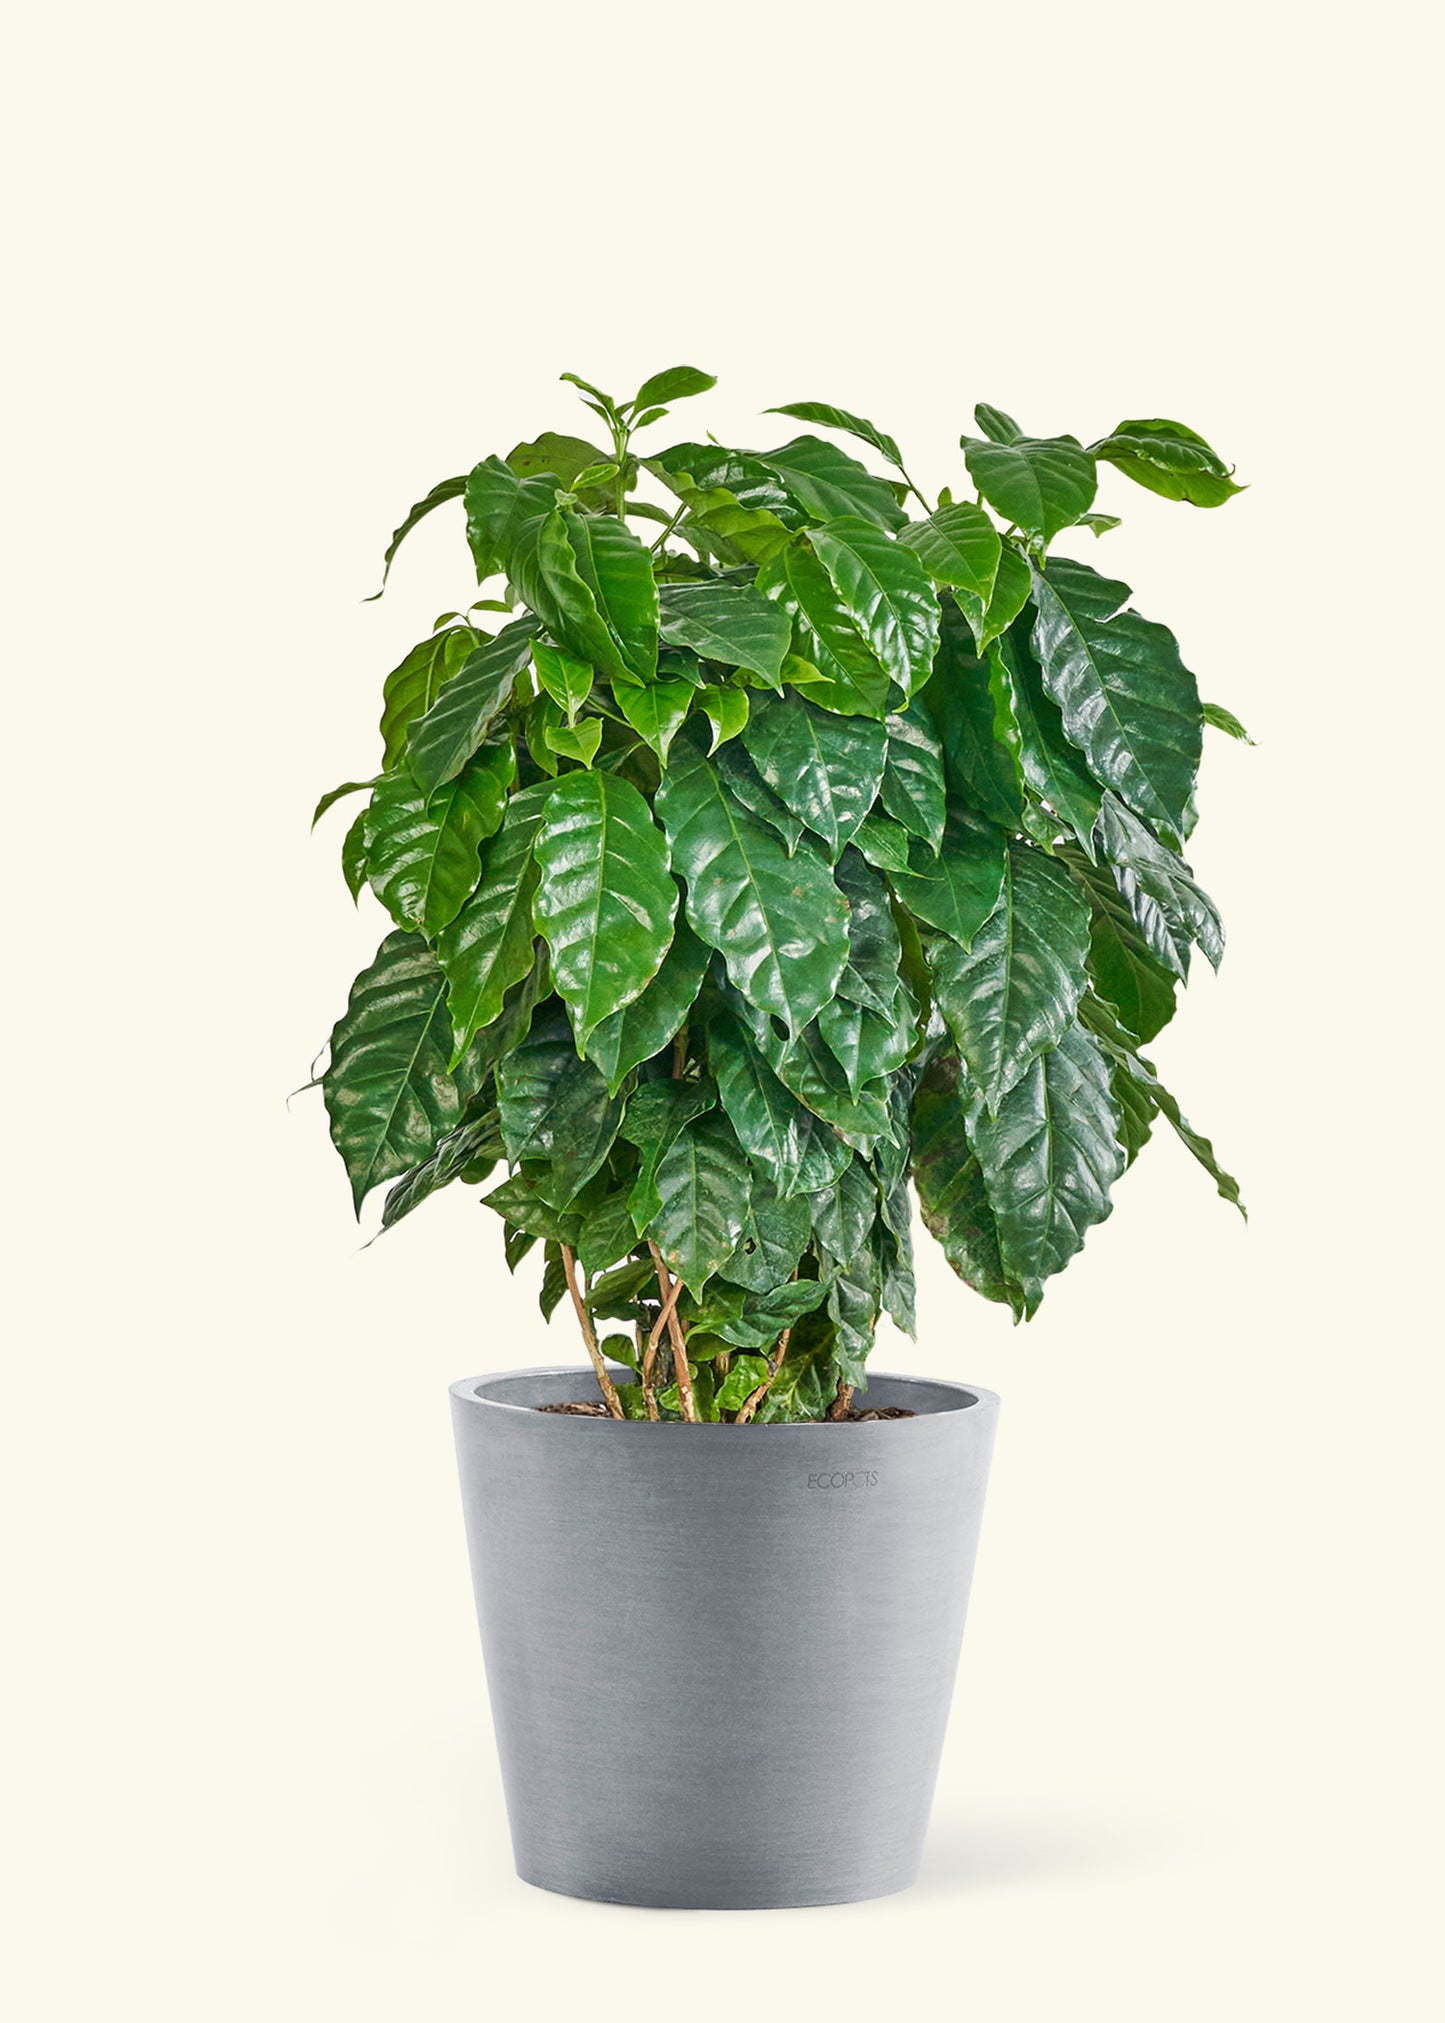 Large Coffee Plant in a gray stone pot.